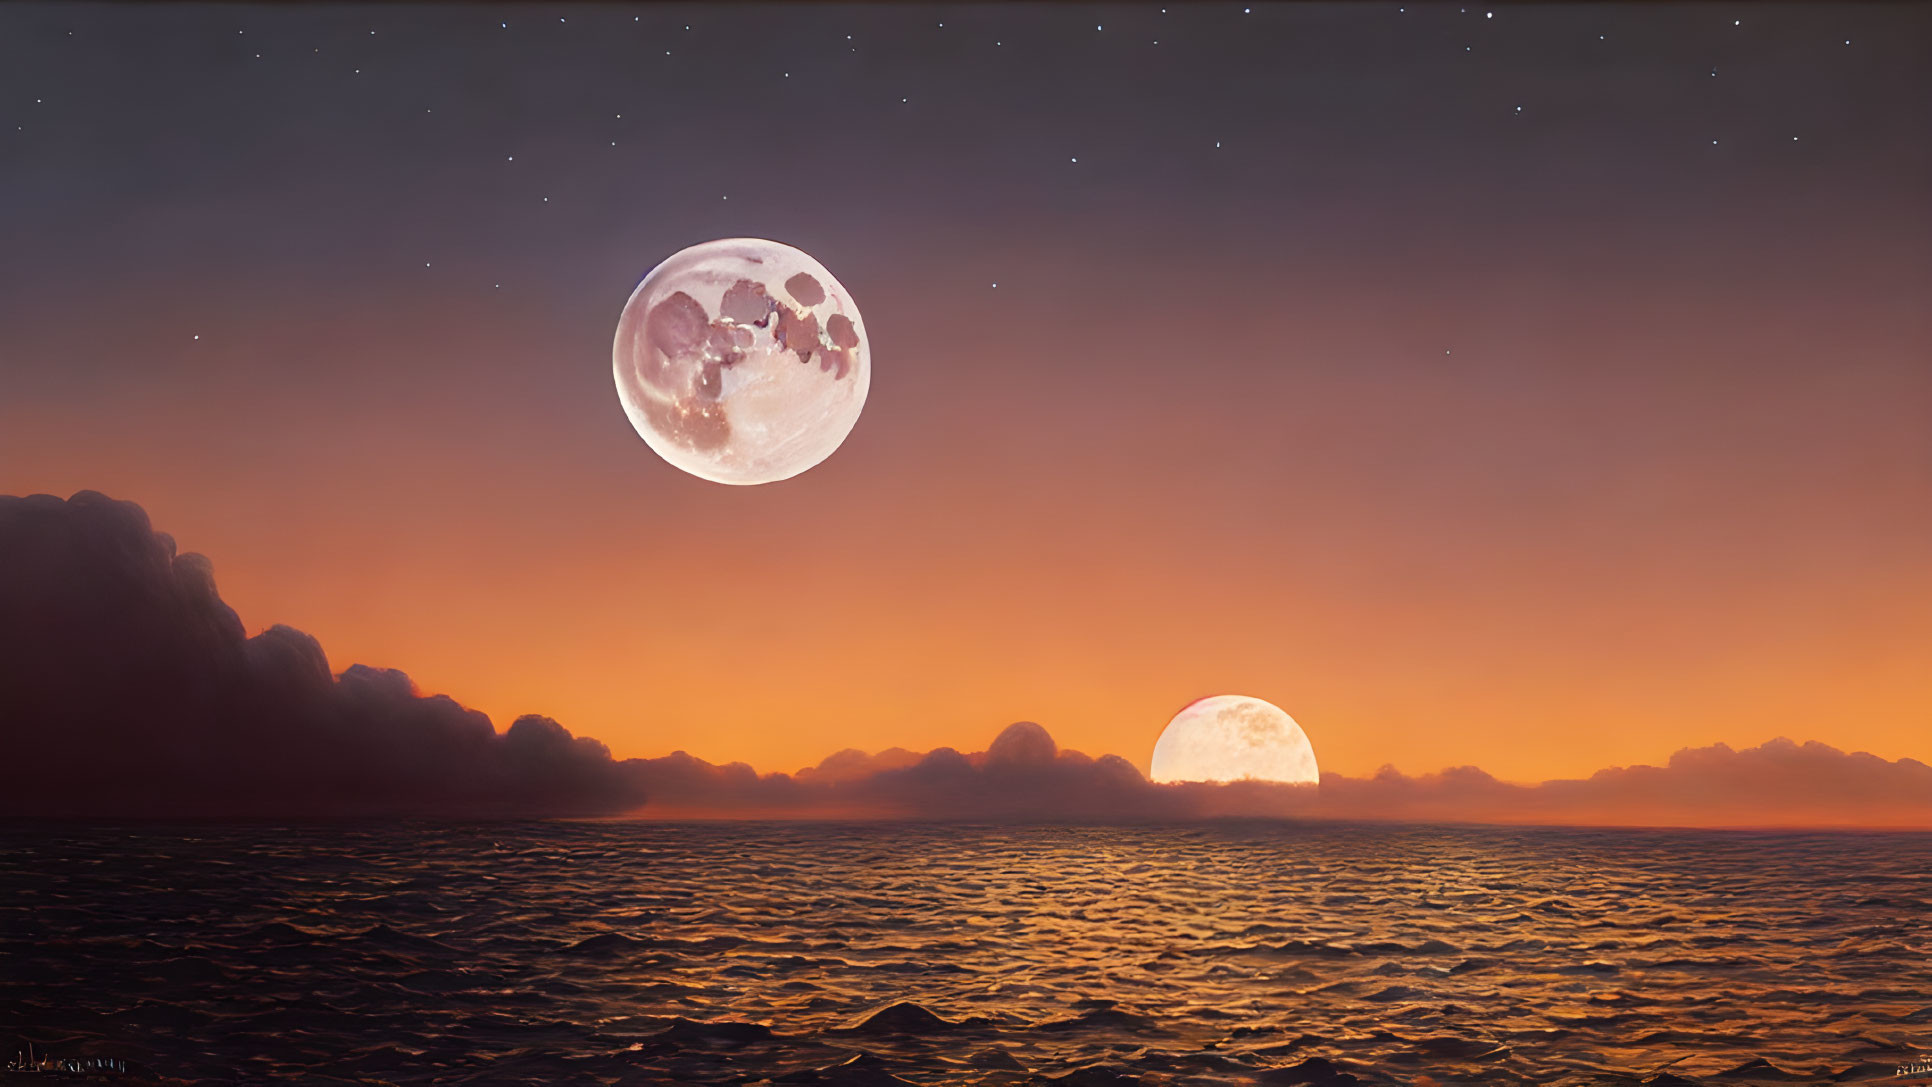 Tranquil seascape at twilight with full moon, sun, and orange sky